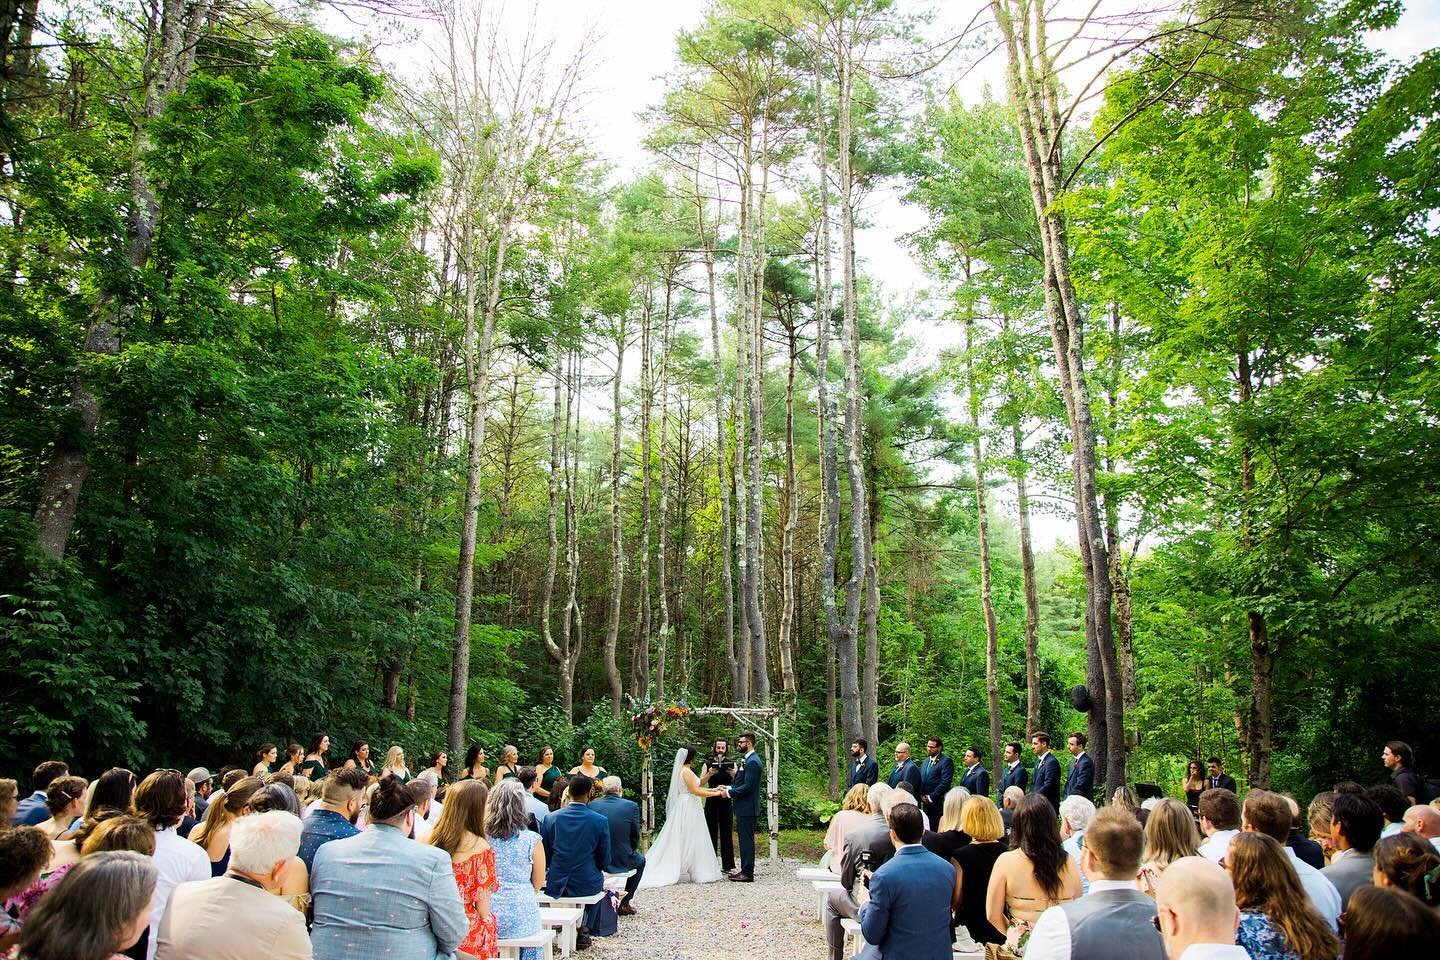 Nature&lsquo;s beauty showing off, making the perfect backdrop for love stories. Here&rsquo;s to forever among the pines!🌲💍 Happy Earth Day! 🌎

&bull;

📸: @juliekgrayphotography